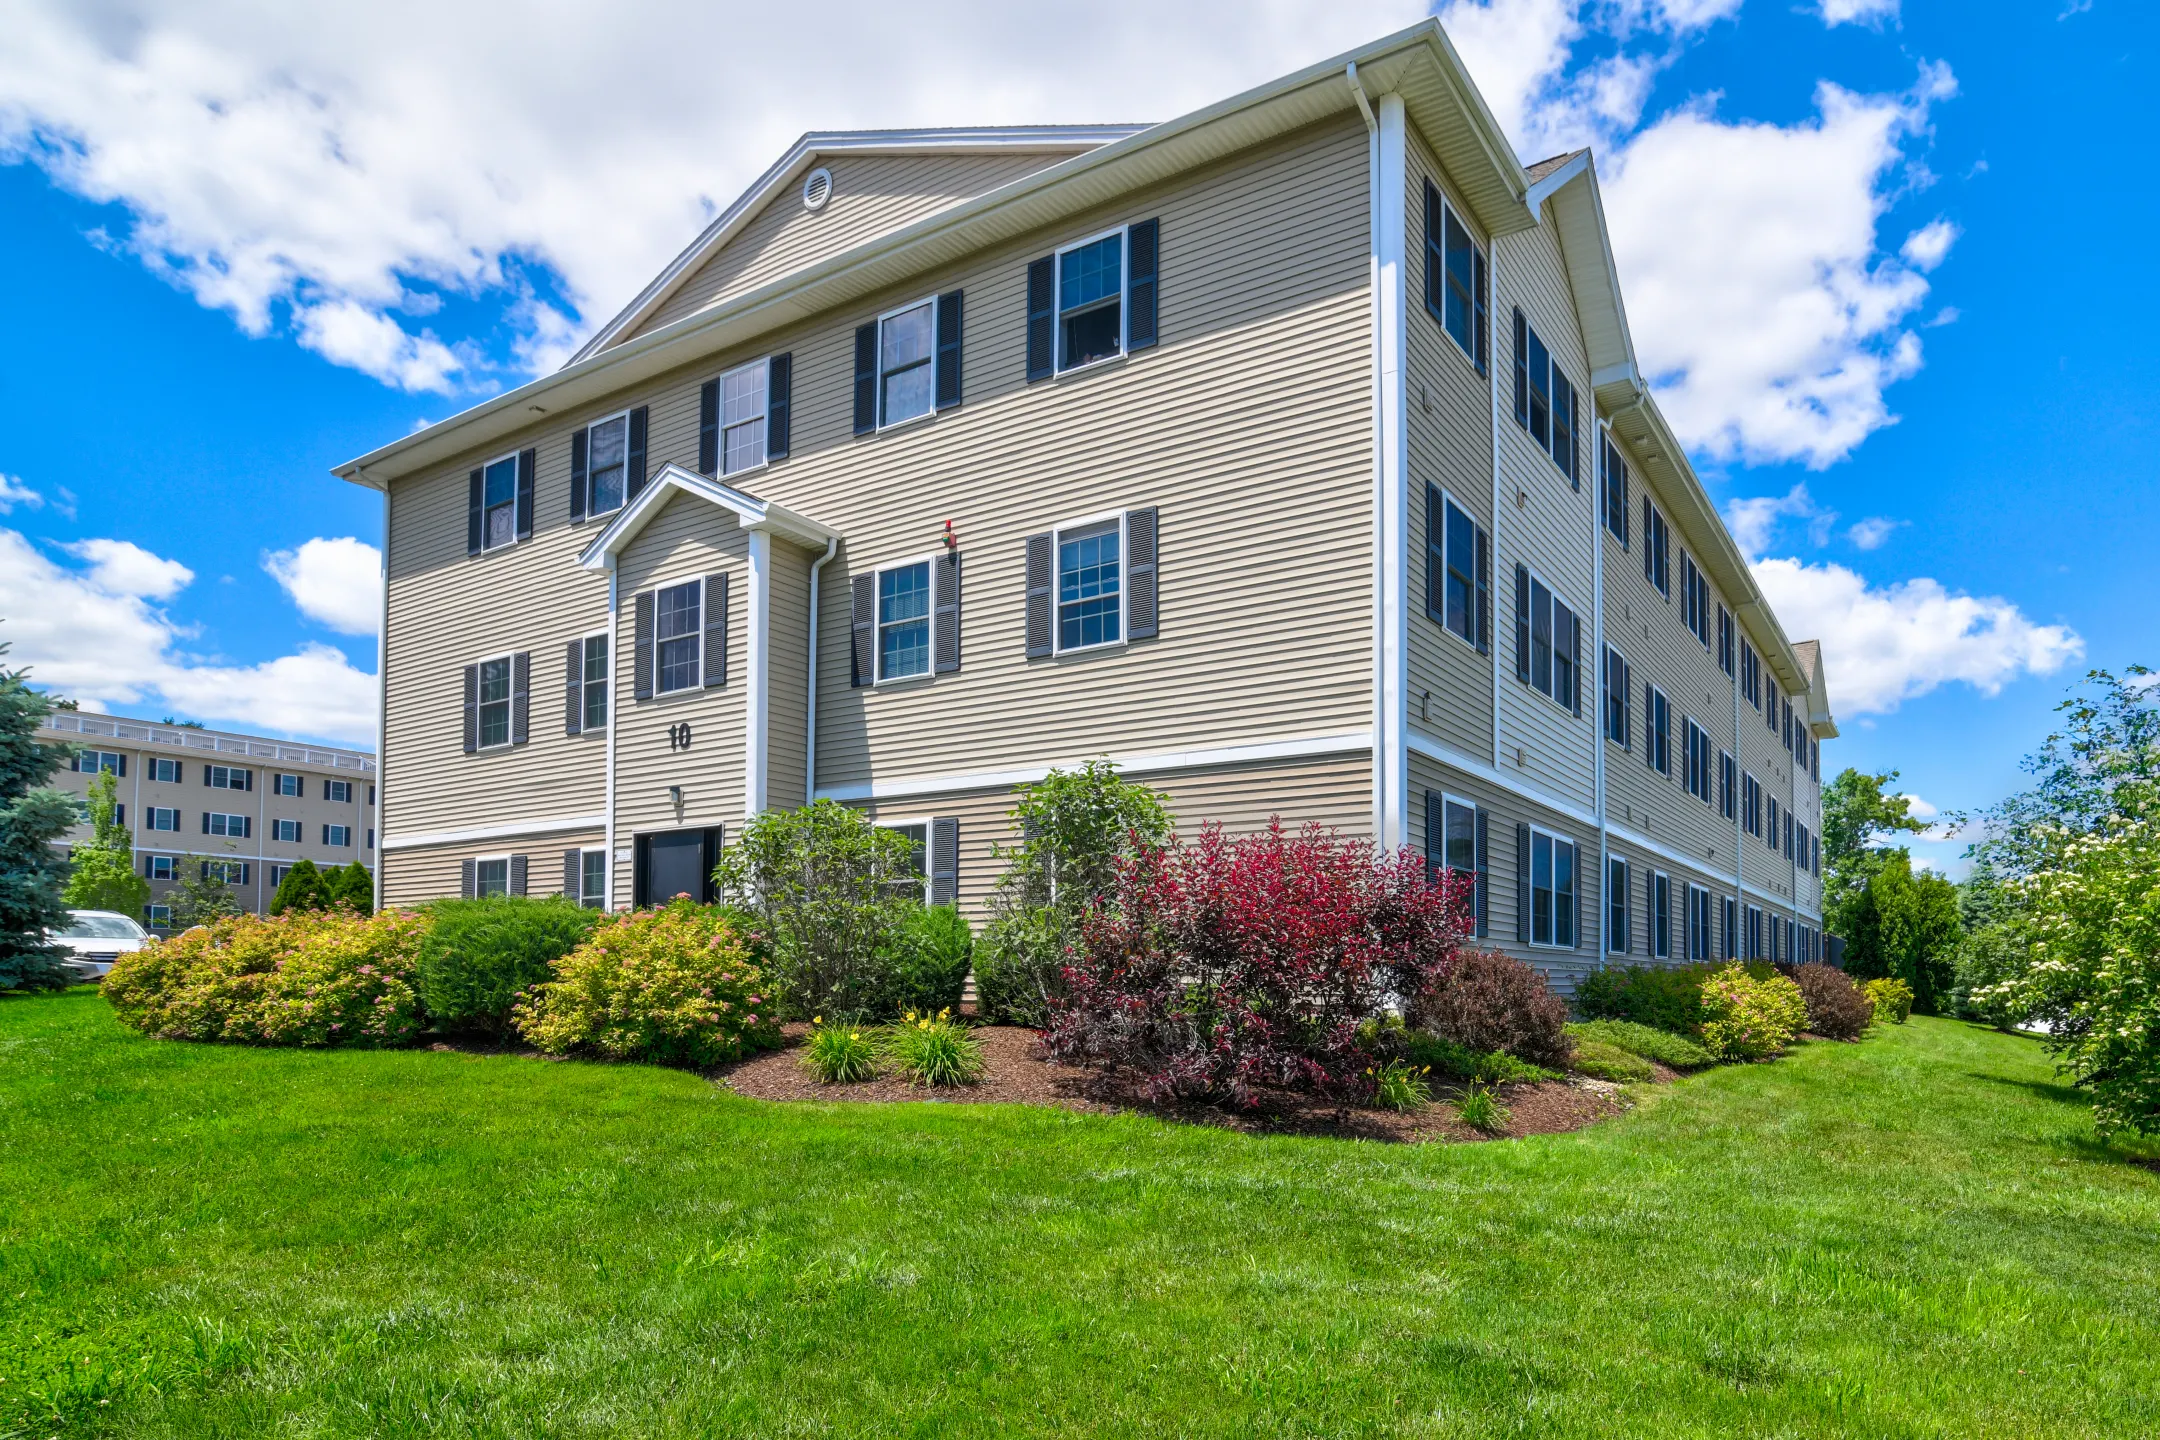 Building - Redstone Apartments and Single Family Homes - Manchester, NH